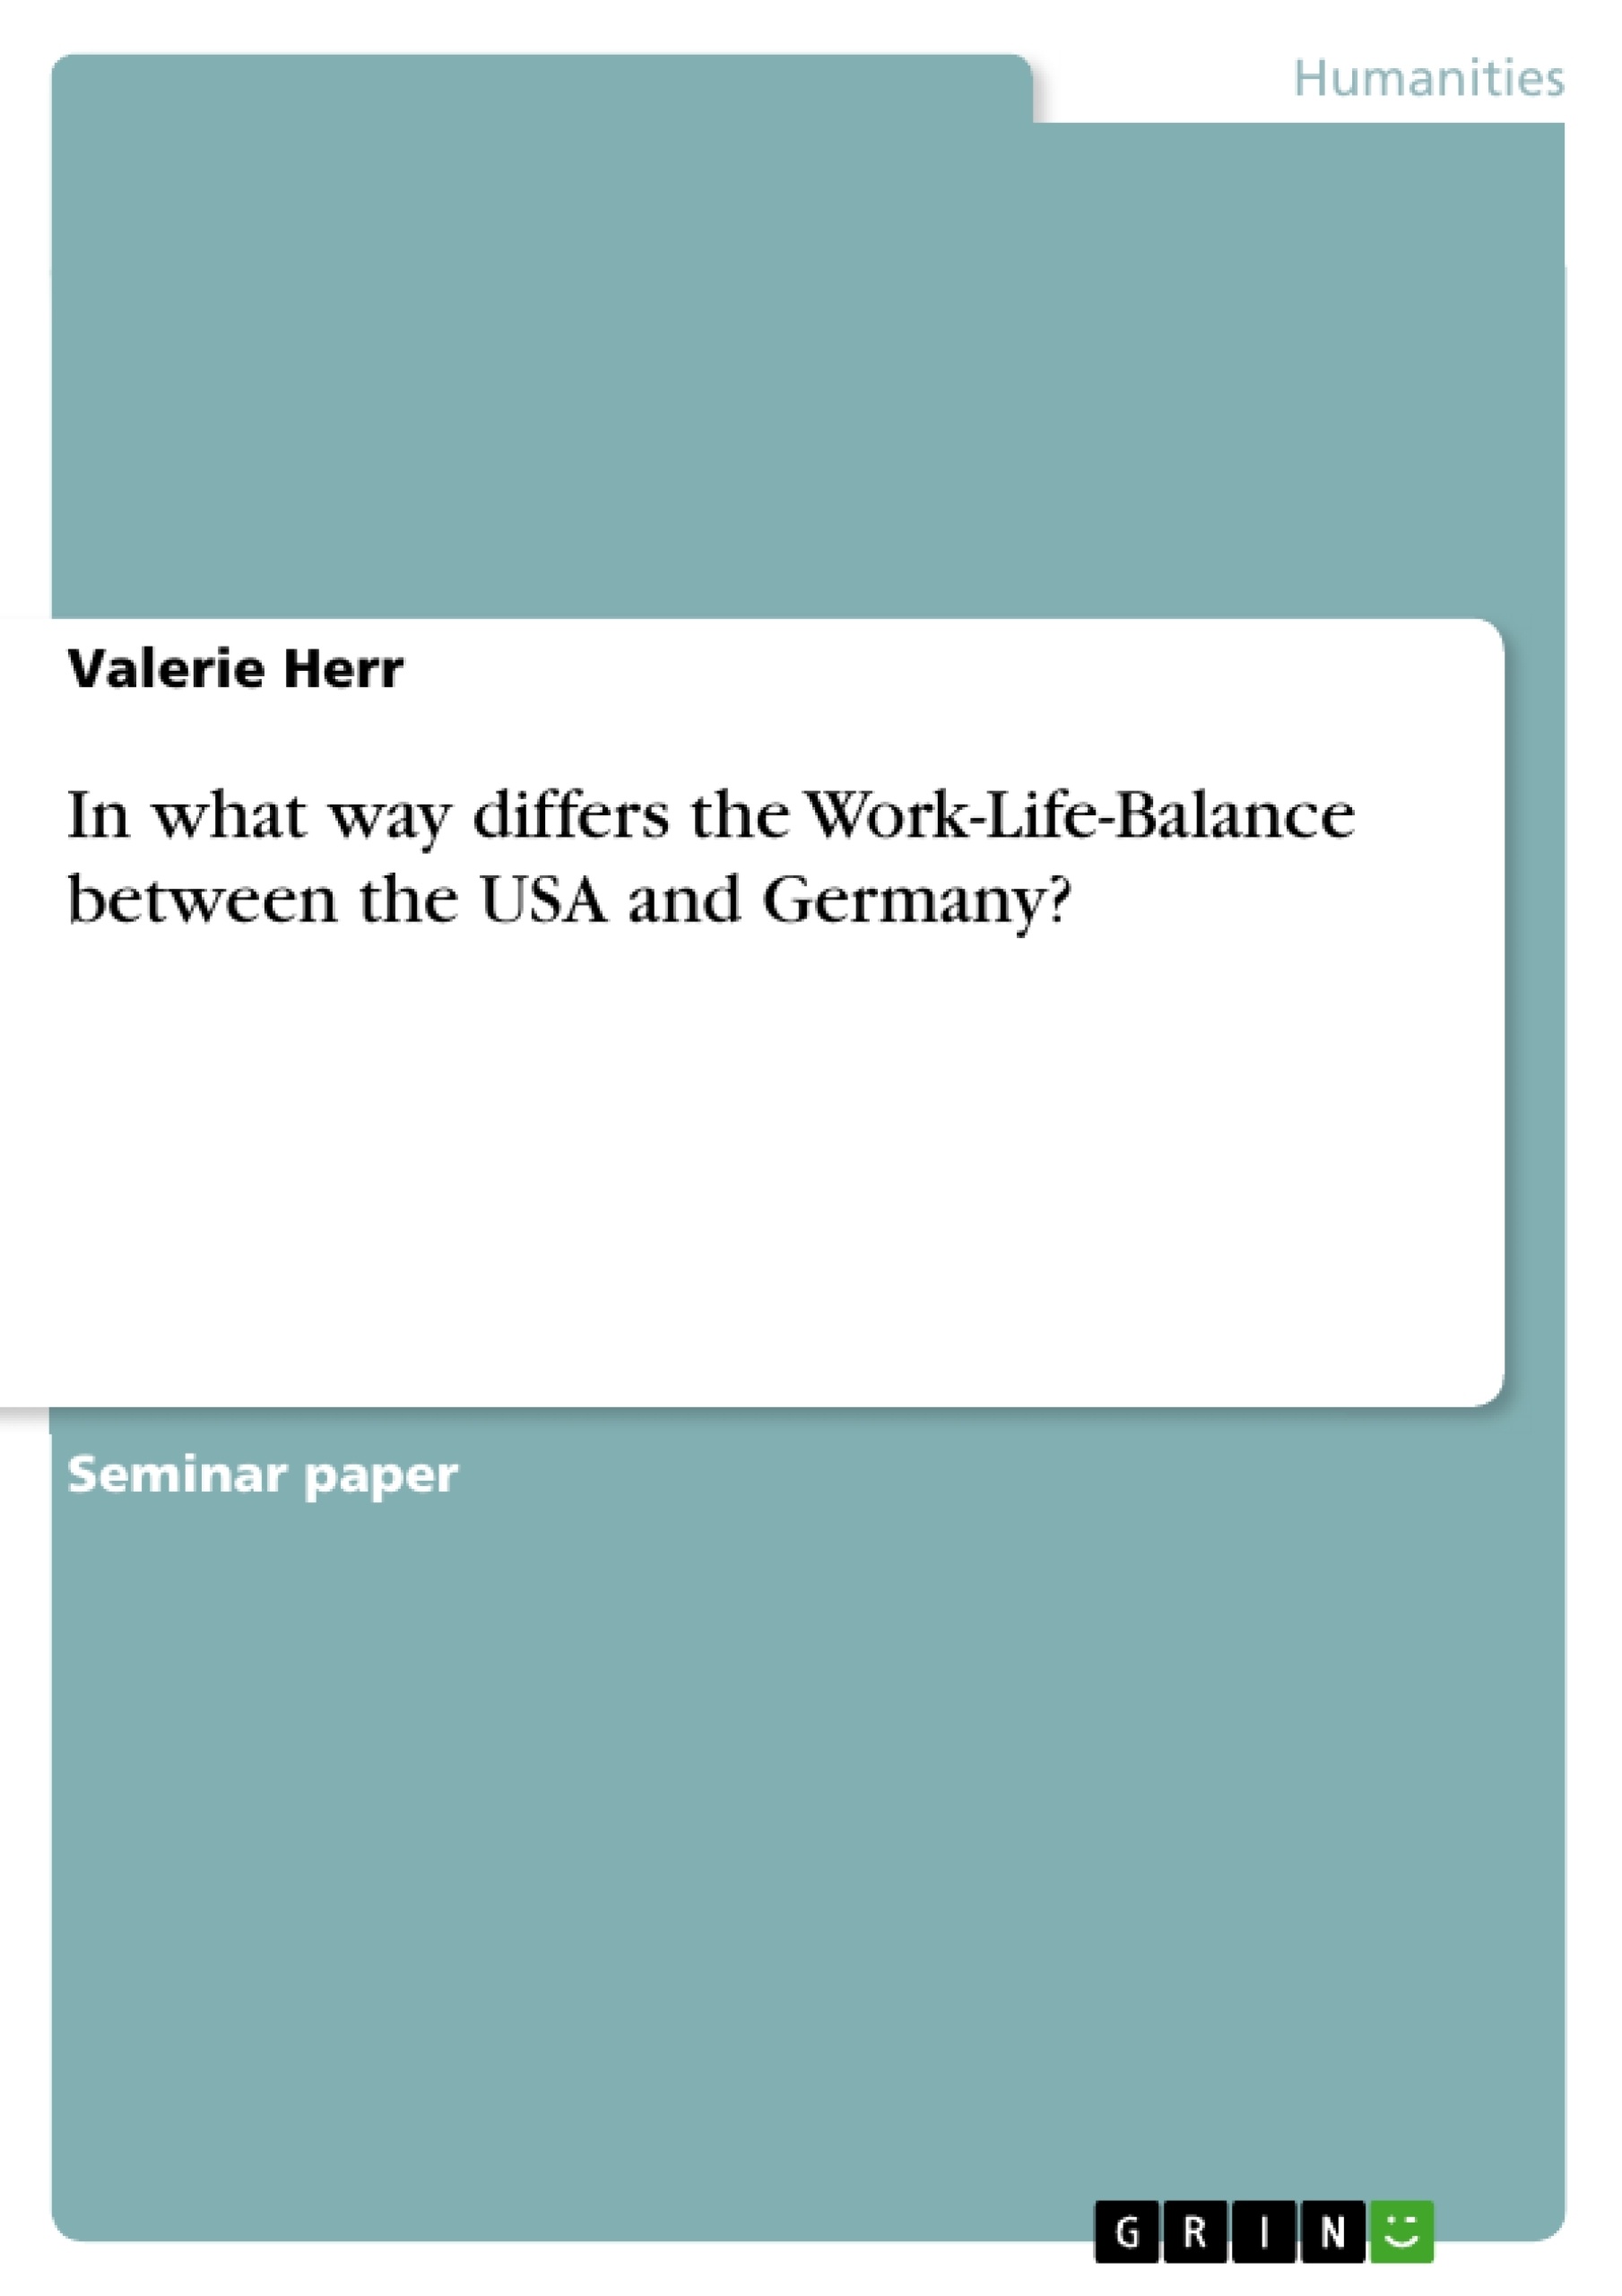 Title: In what way differs the Work-Life-Balance between the USA and Germany?